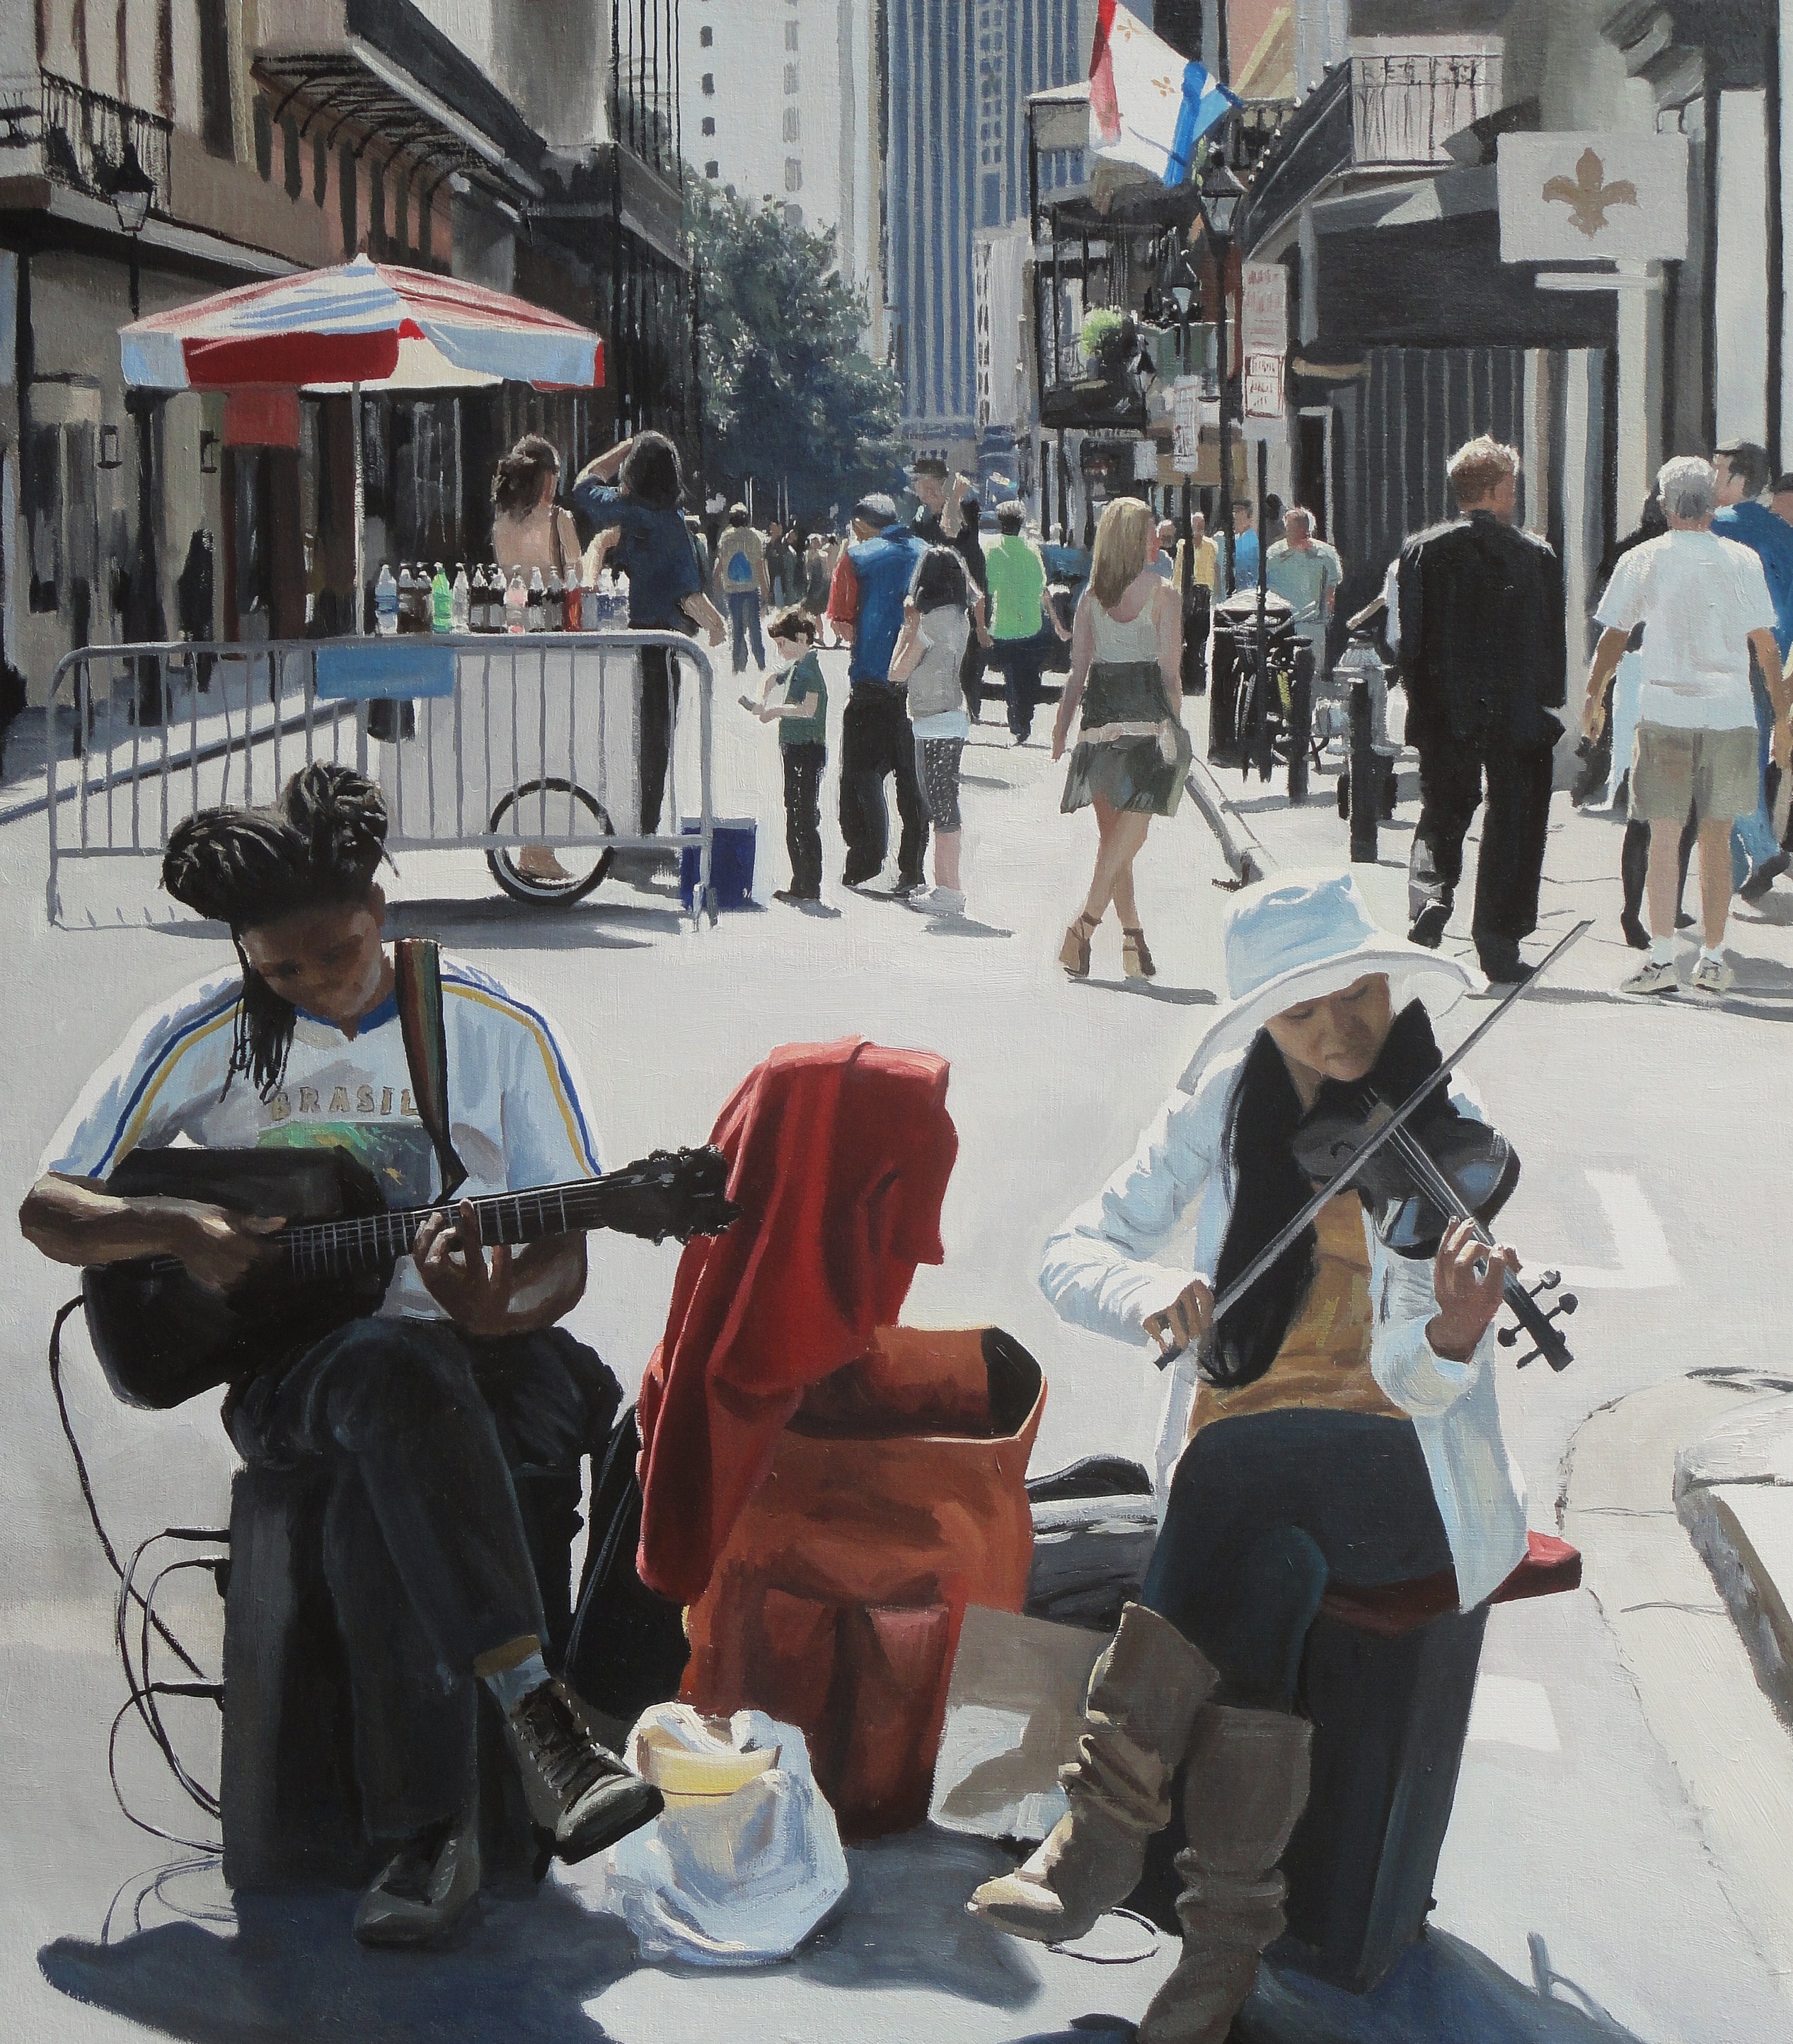 New Orleans, oil on canvas, 24" x 28", 2010.